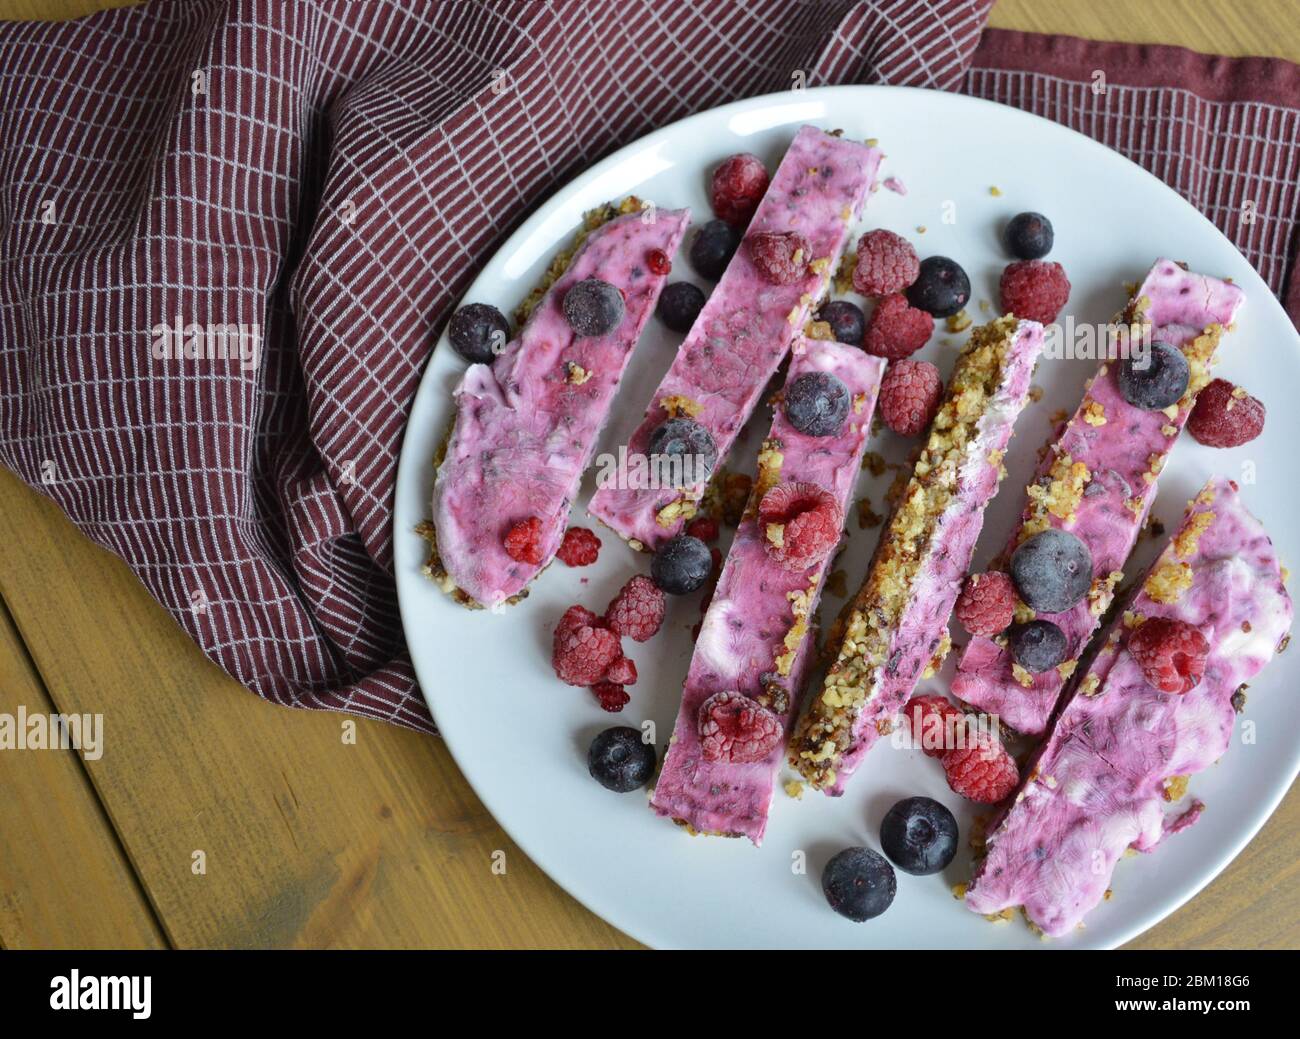 Homemade pink frozen yoghurt bars with raspberries and blueberries. Snack for the summer days Stock Photo